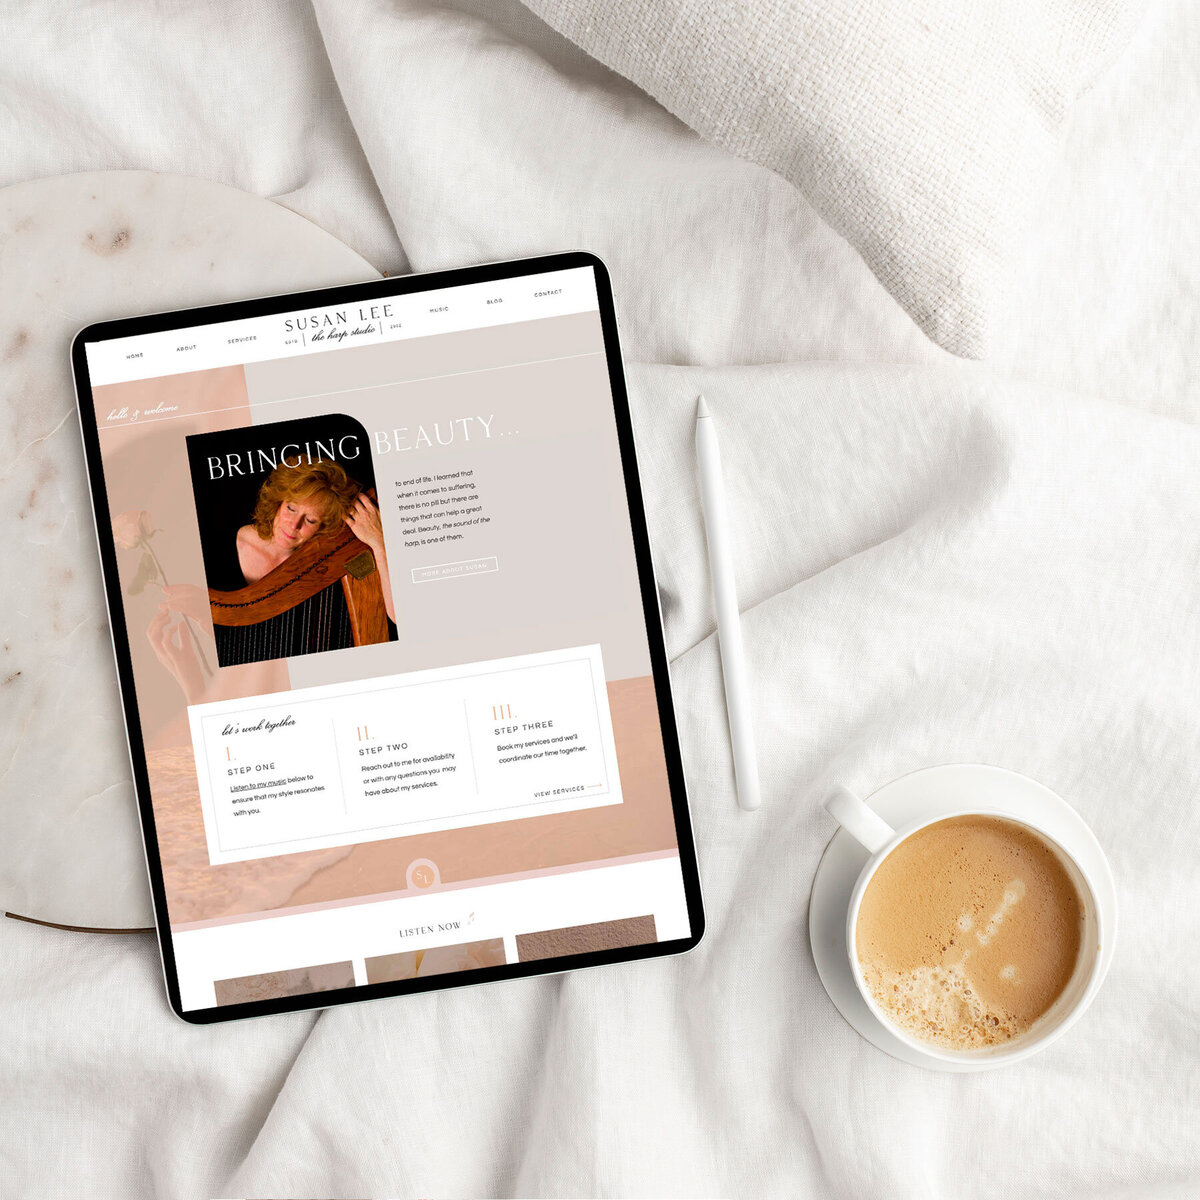 Tour Susan Lee's full website, crafted to elevate her harpist services with creativity and seamless website design solutions for creatives.